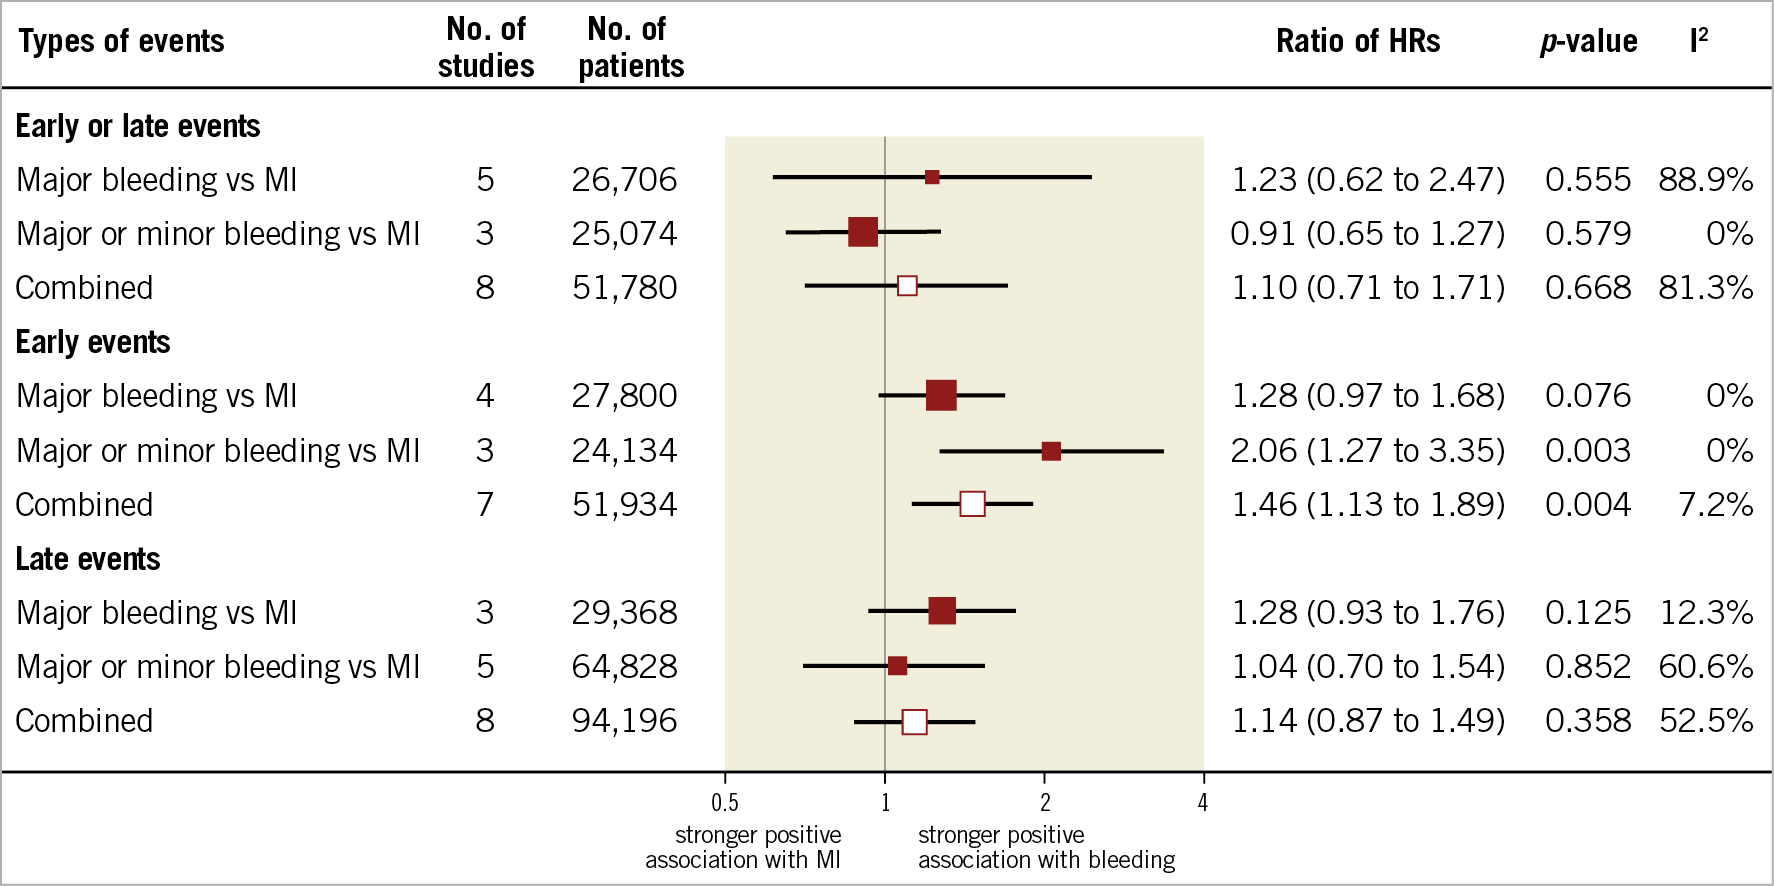 Figure 1. Association of bleeding and myocardial infarction with mortality in patients with coronary artery disease treated with medical therapy or percutaneous coronary intervention.